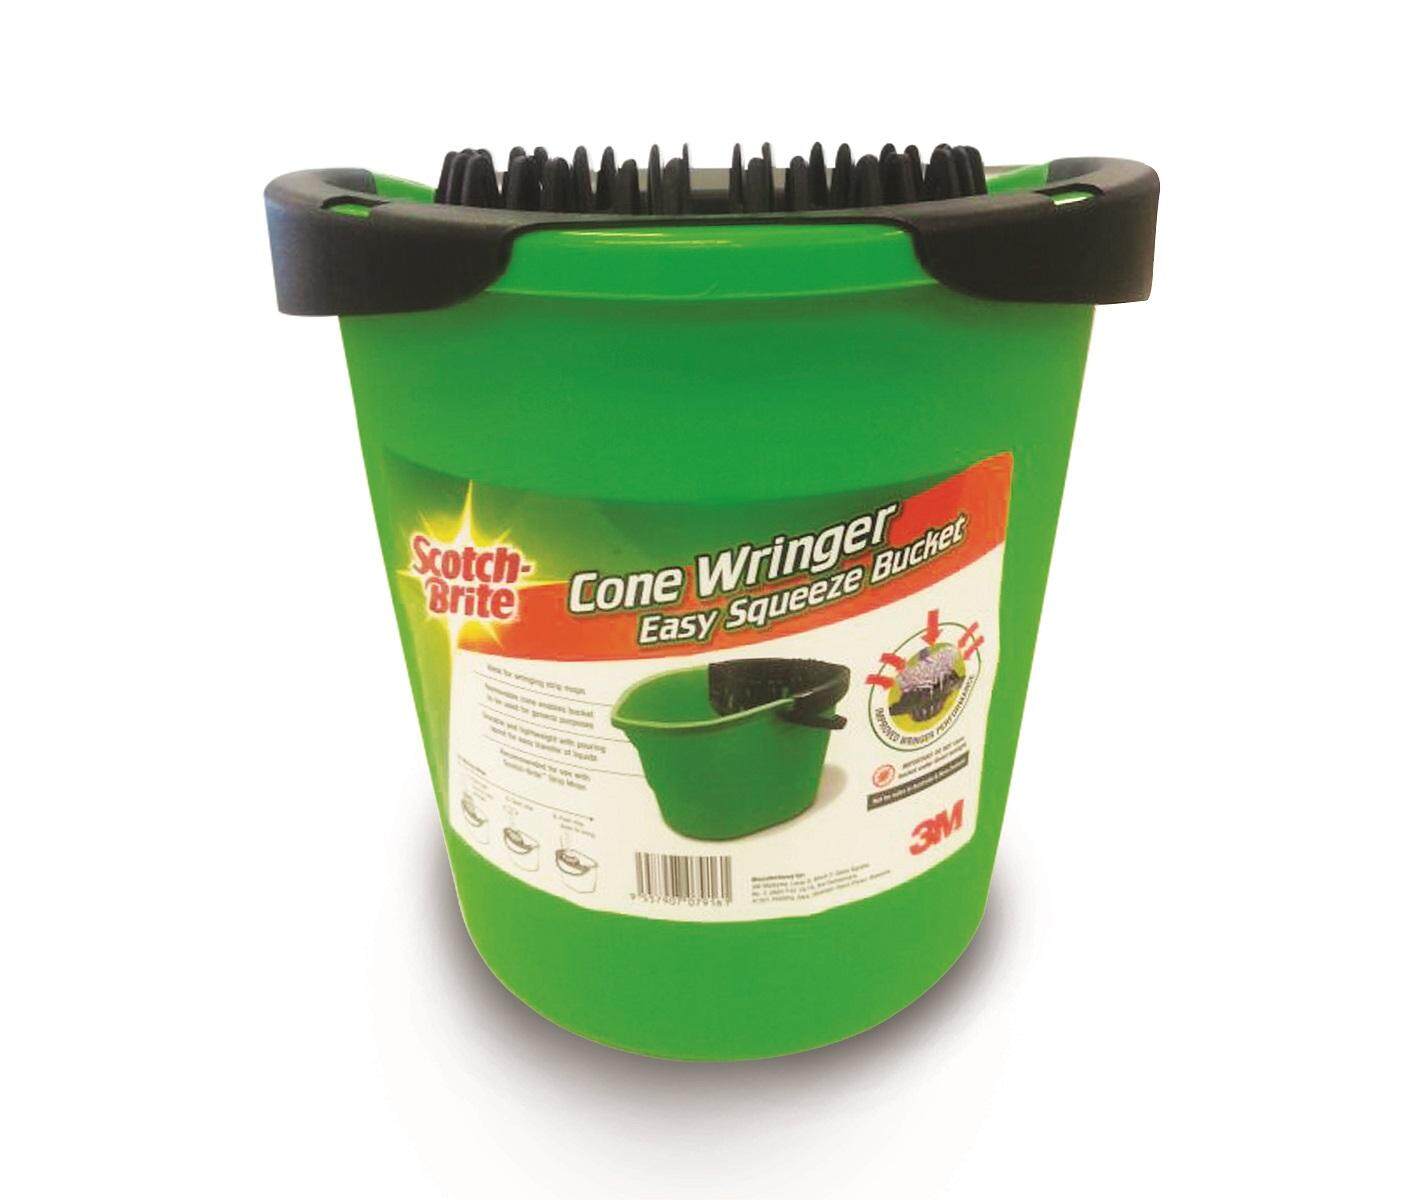 3M Scotch Brite Cone Wringer Easy Squeeze Bucket (1 Pc/Pack)